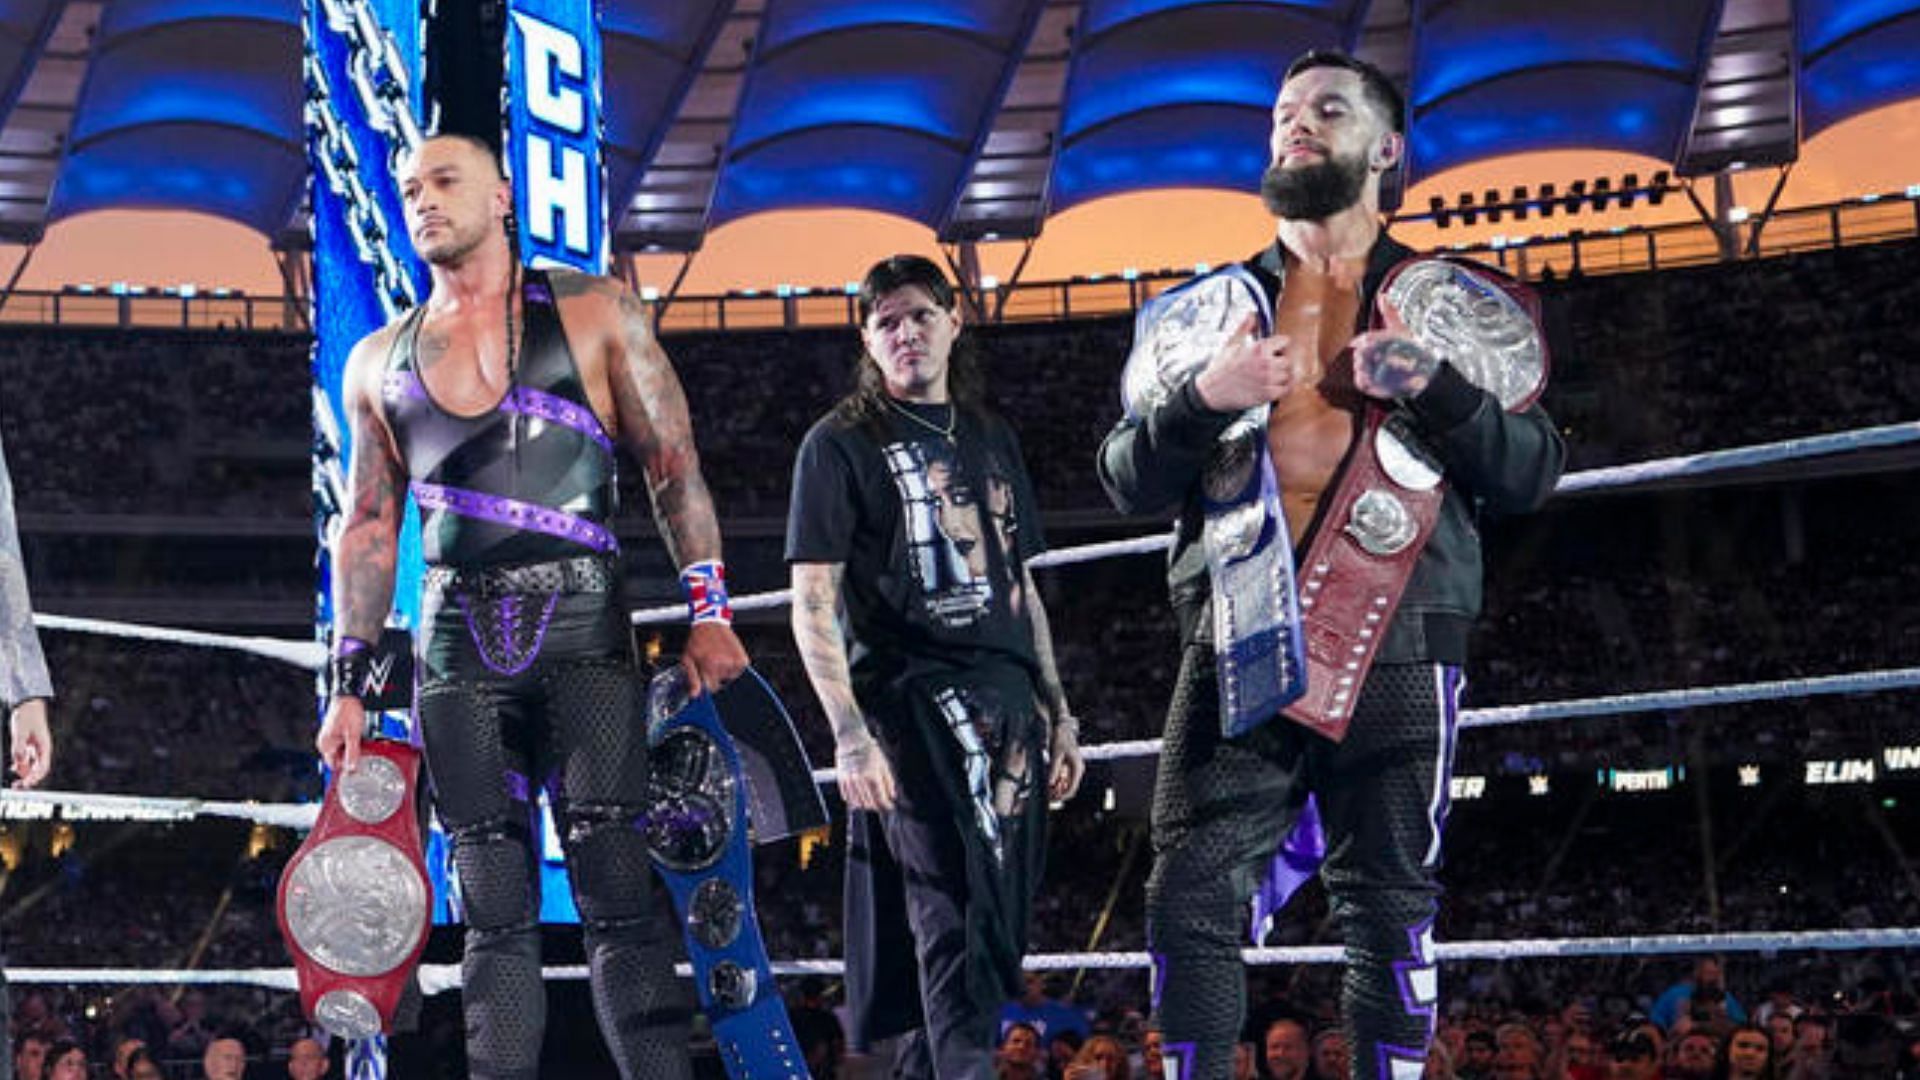 The Judgment Day are the reigning Undisputed WWE Tag Team Champions